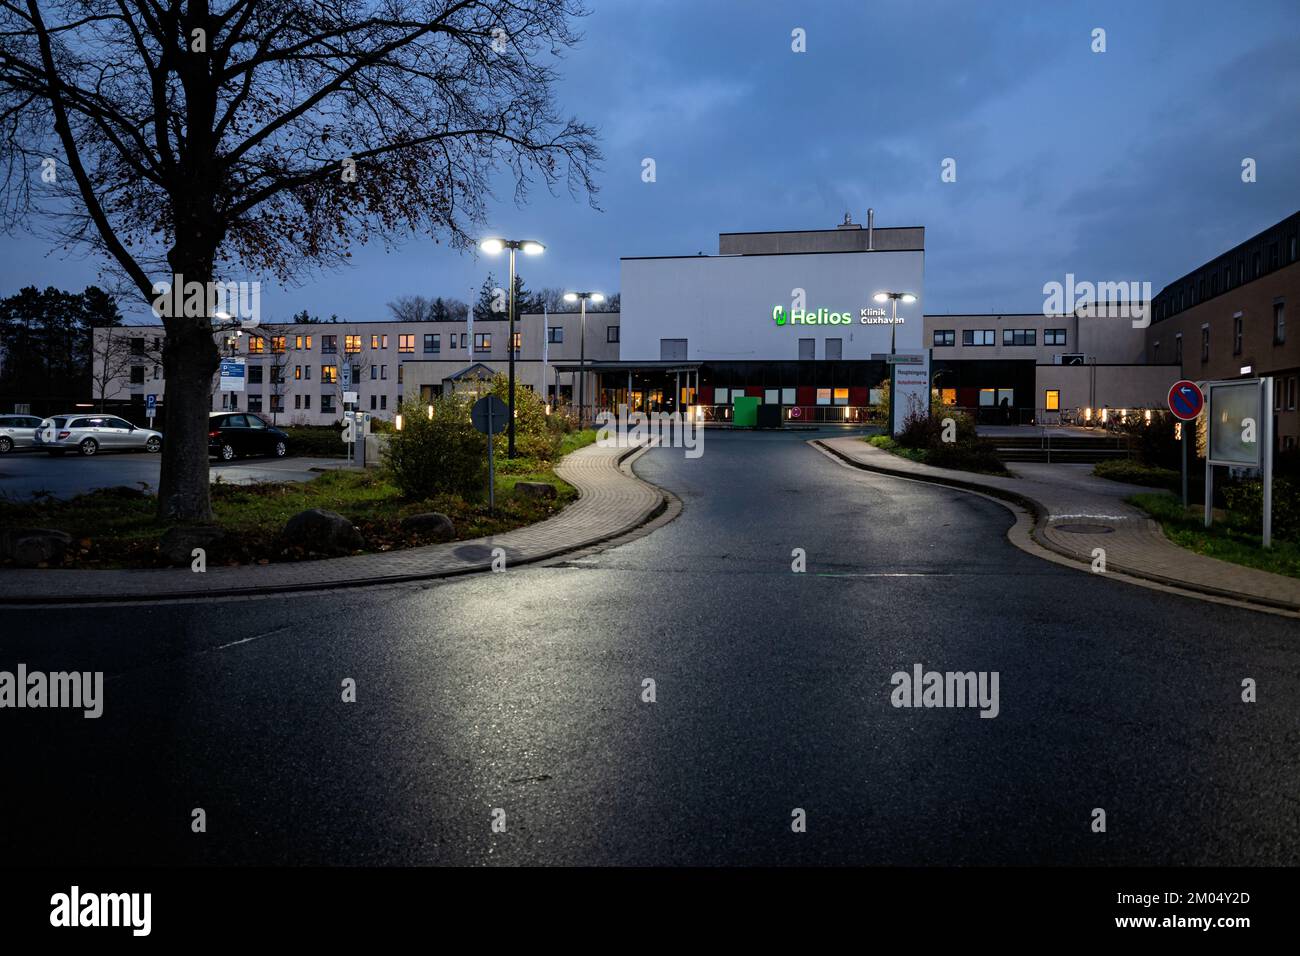 Helios hospital in Cuxhaven, Germany Stock Photo